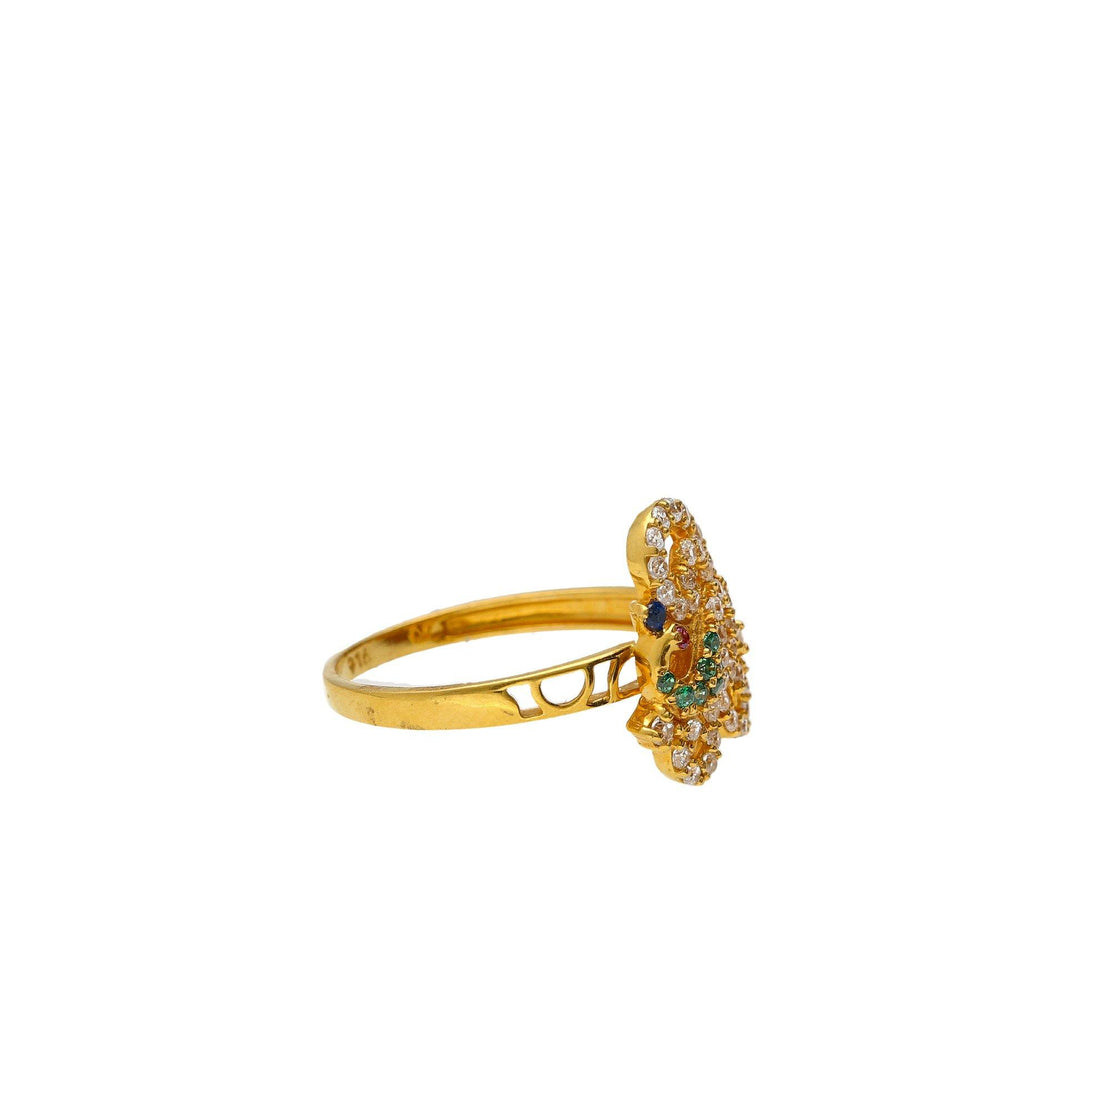 Buy quality 22 CT gold peacock design ring in Ahmedabad